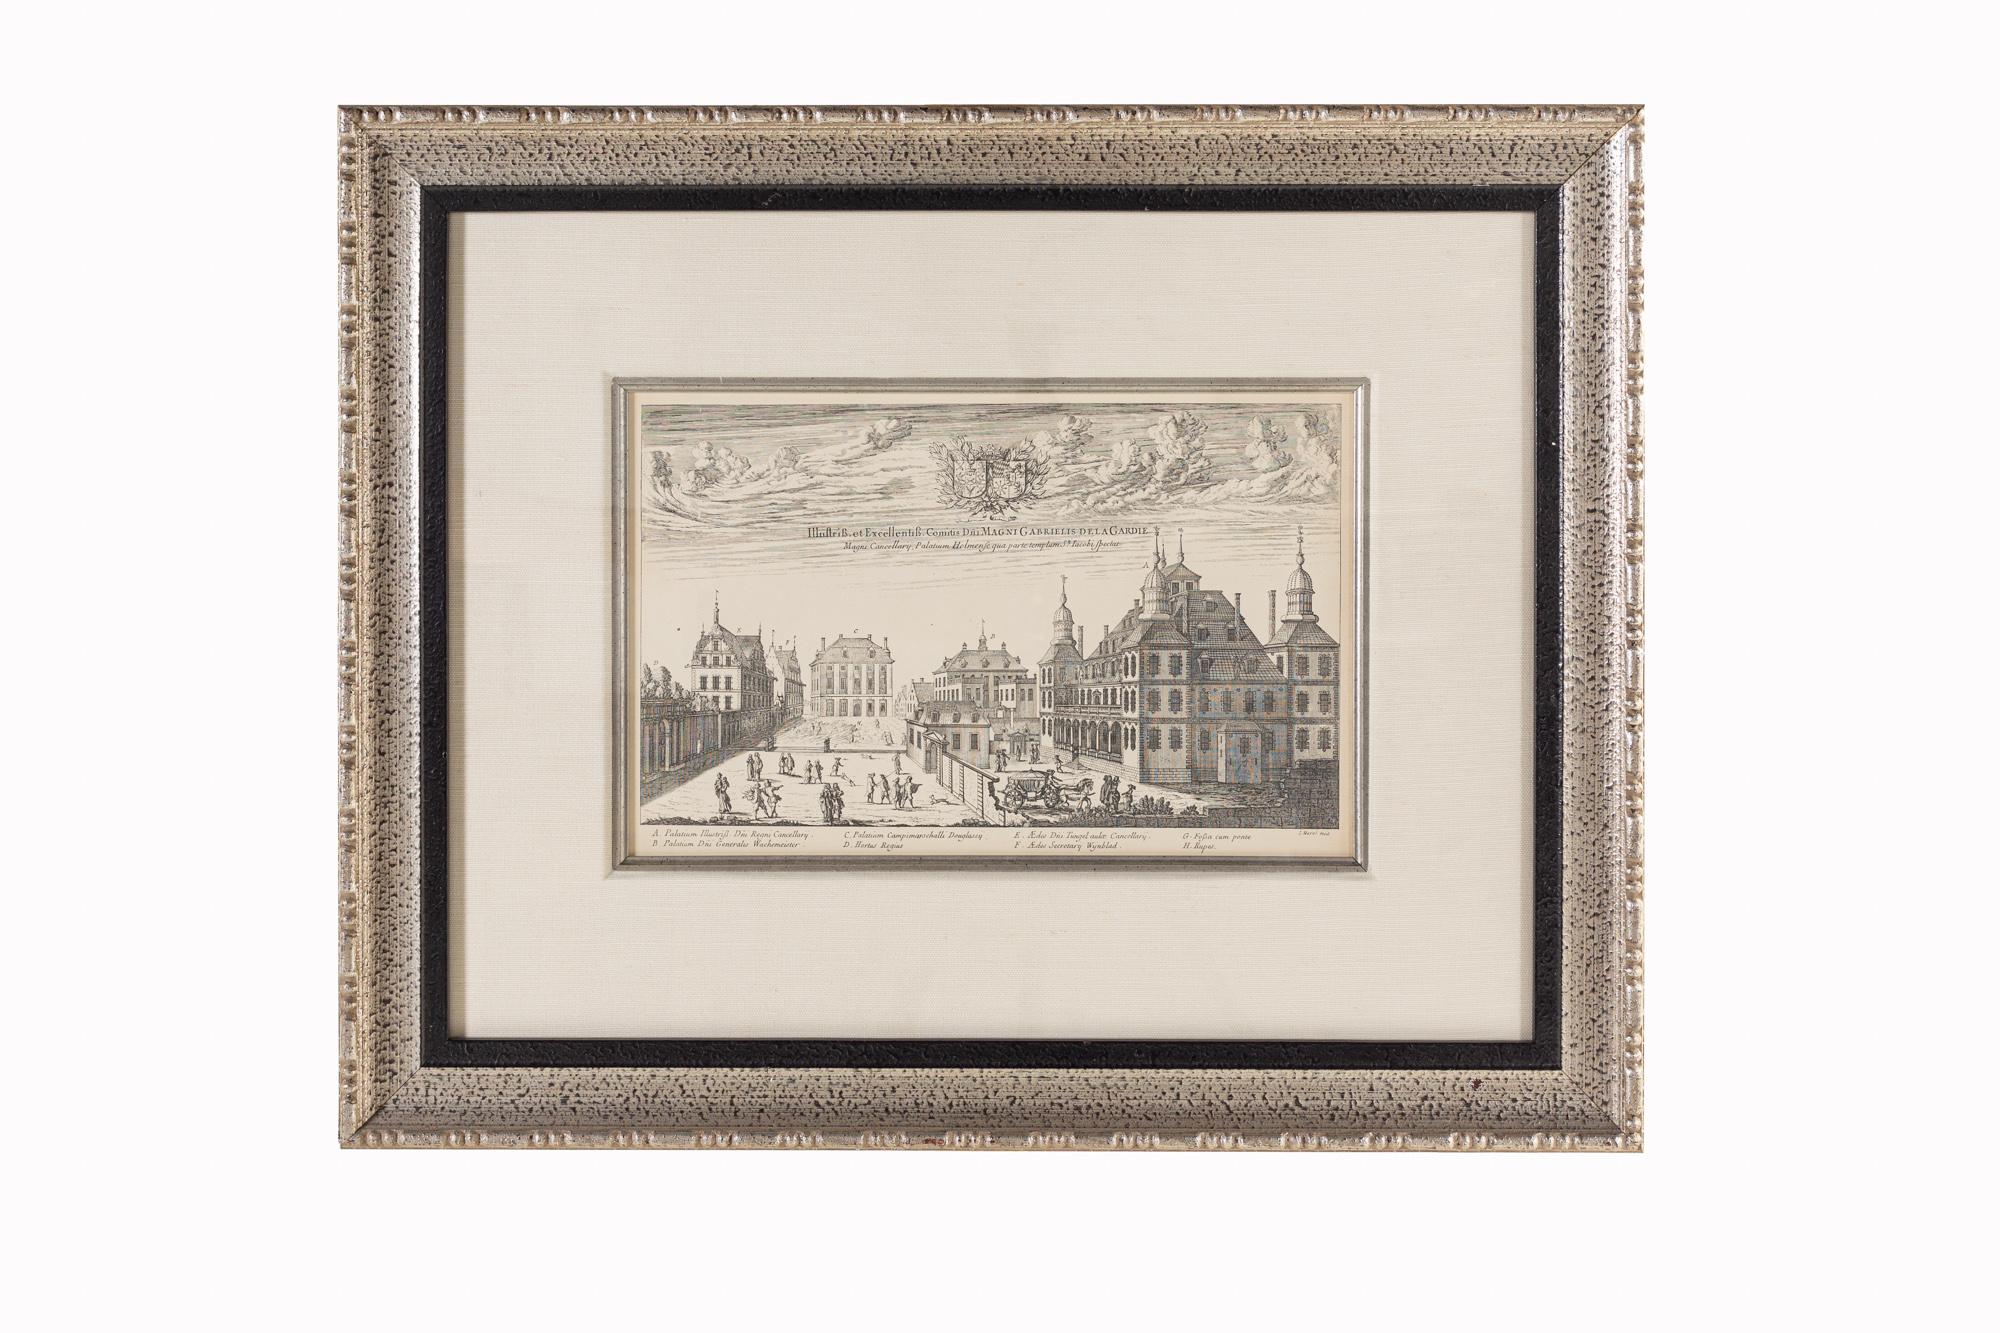 Black and white architectural framed print

This print measures: 27 wide x 2 deep x 21 inches high

This print is in excellent Vintage condition with minor marks, dents, and wear.

We take our photos in a controlled lighting studio to show as